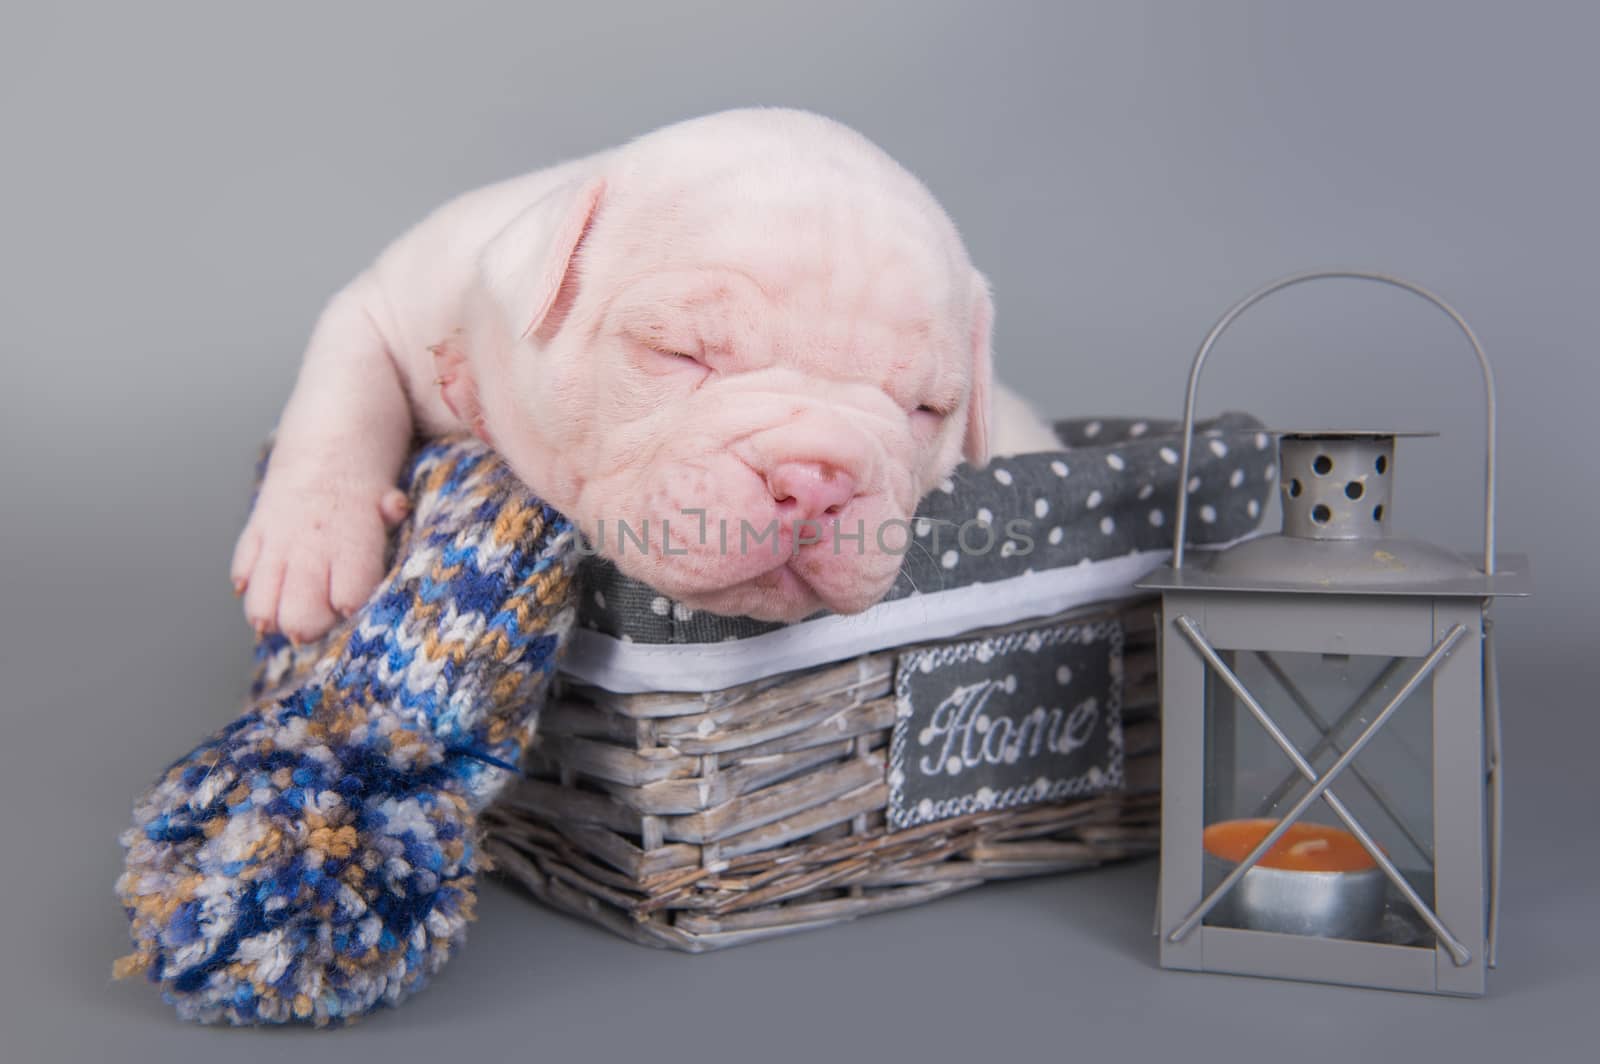 Funny small American Bulldog puppy dog is sleeping in a wood basket with lantern on gray blue background.